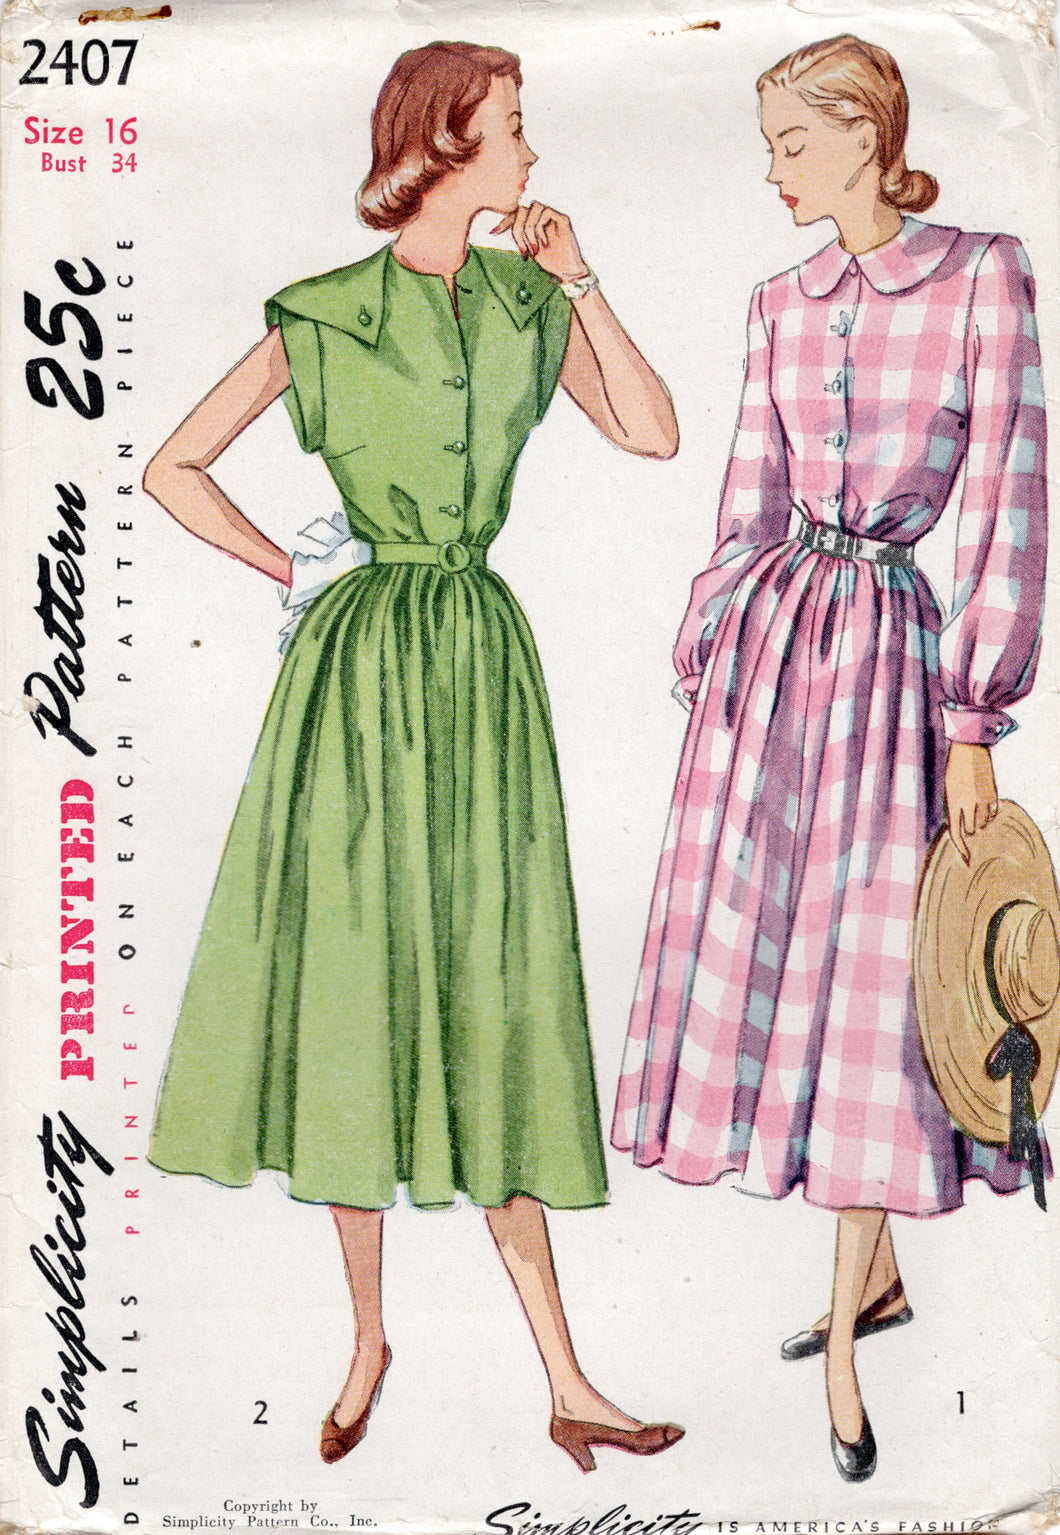 1940's Simplicity Shirtwaist Dress with Collar or Tab Accent - Bust 34